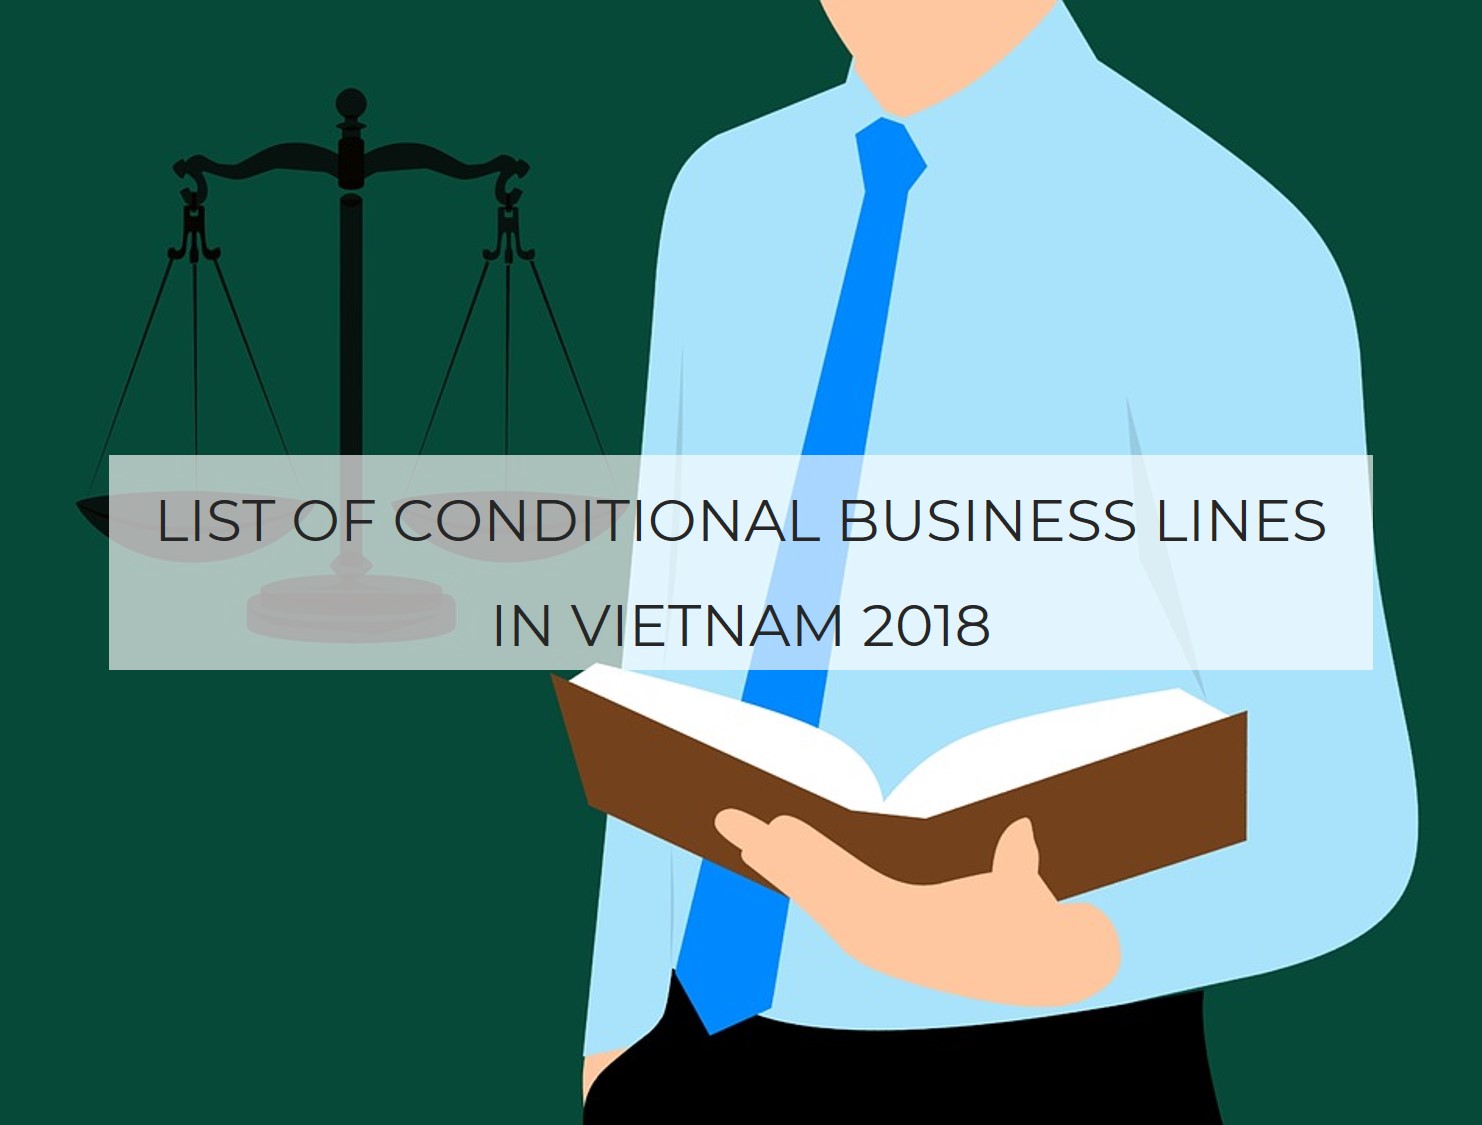 LIST OF CONDITIONAL BUSINESS LINES IN VIETNAM 2018